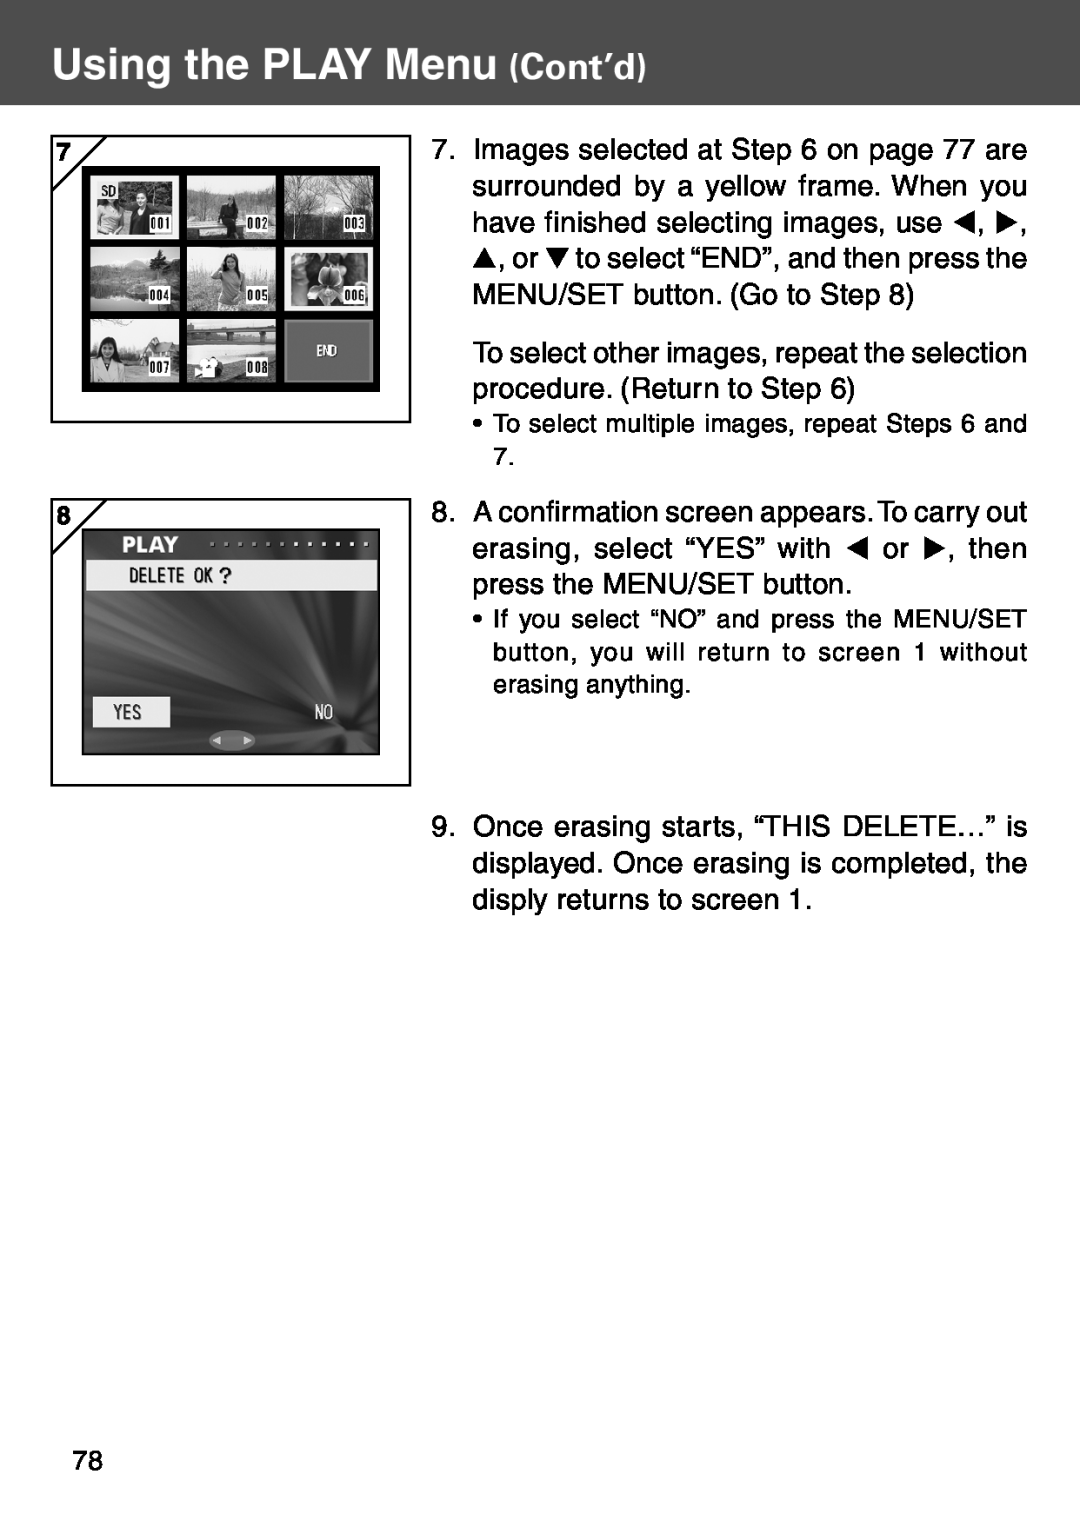 Konica Minolta KD-500Z user manual Using the PLAY Menu Cont’d, To select multiple images, repeat Steps 6 and 